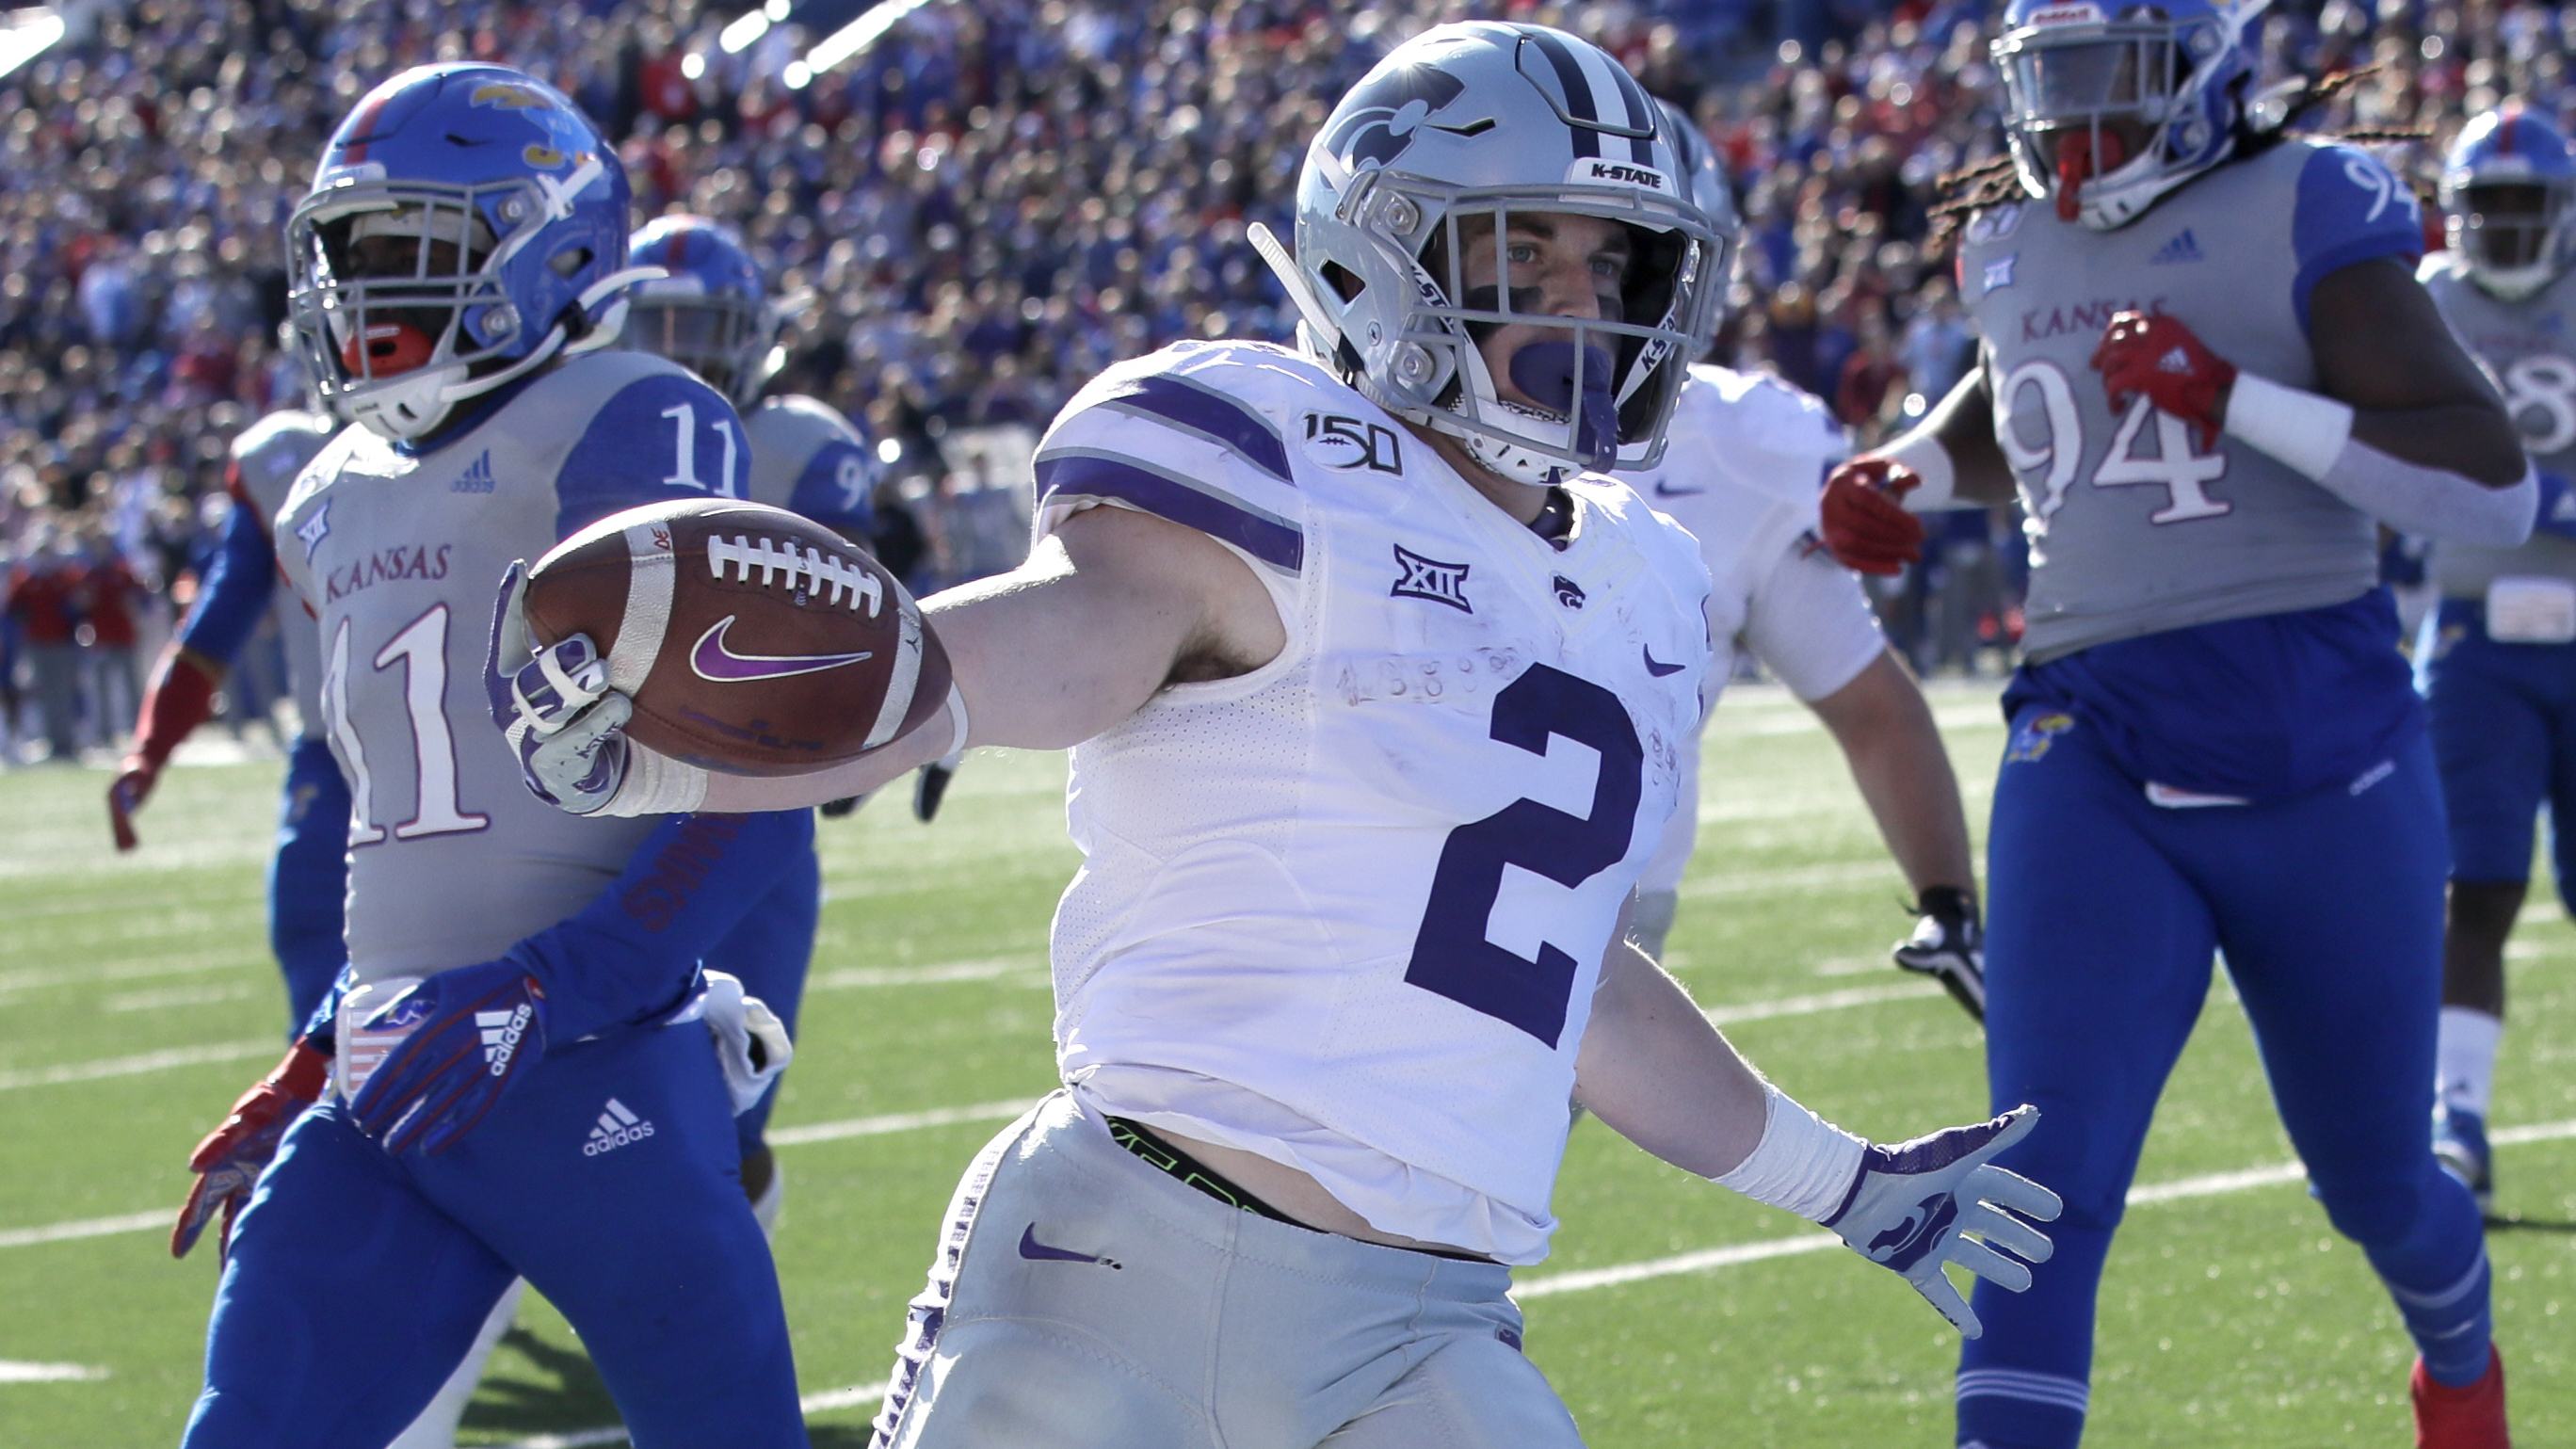 Five rushing touchdowns lead No. 22 Kansas State to 38-10 rout of Kansas